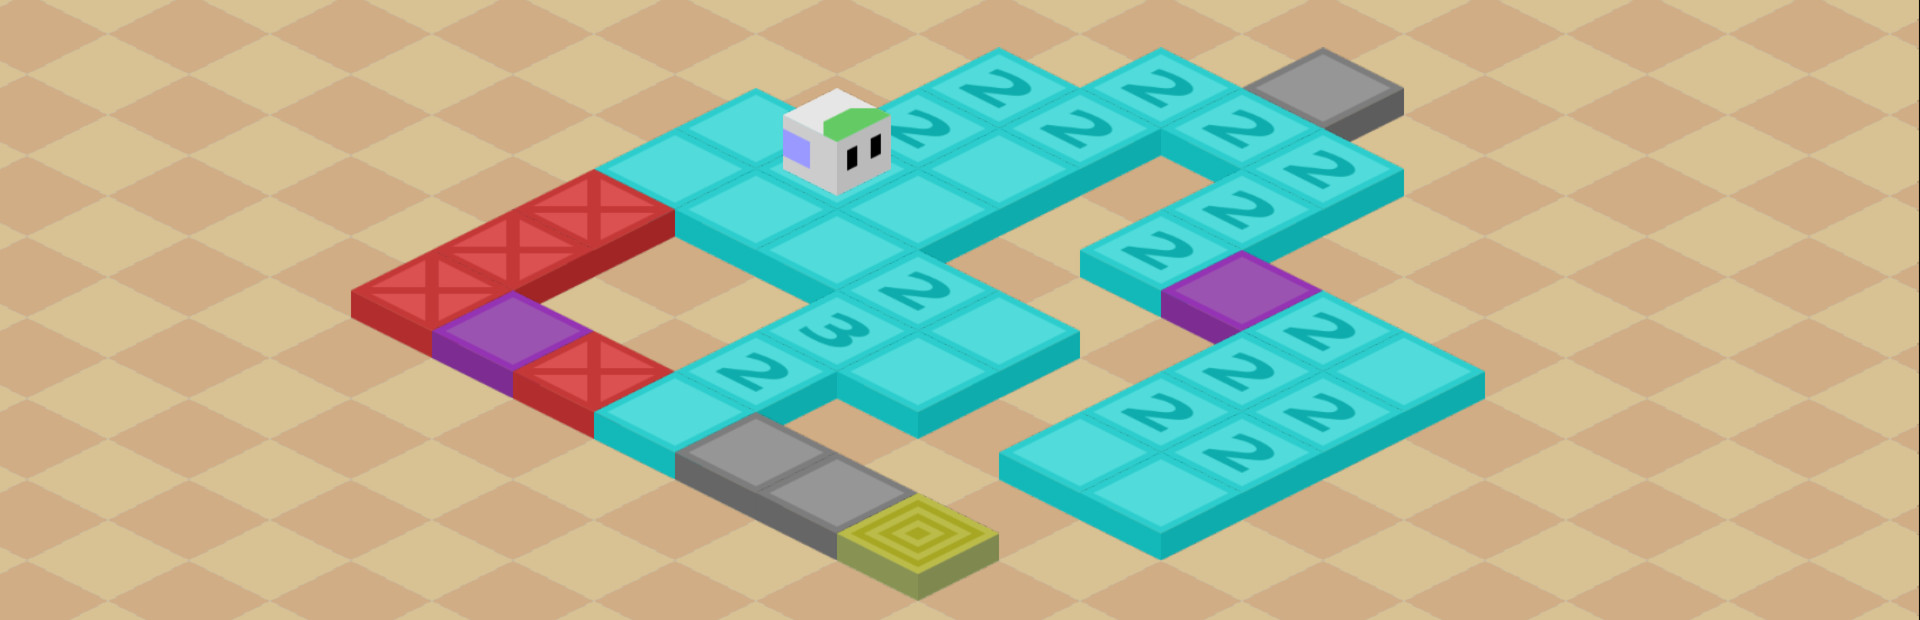 Isotiles - Isometric Puzzle Game cover image